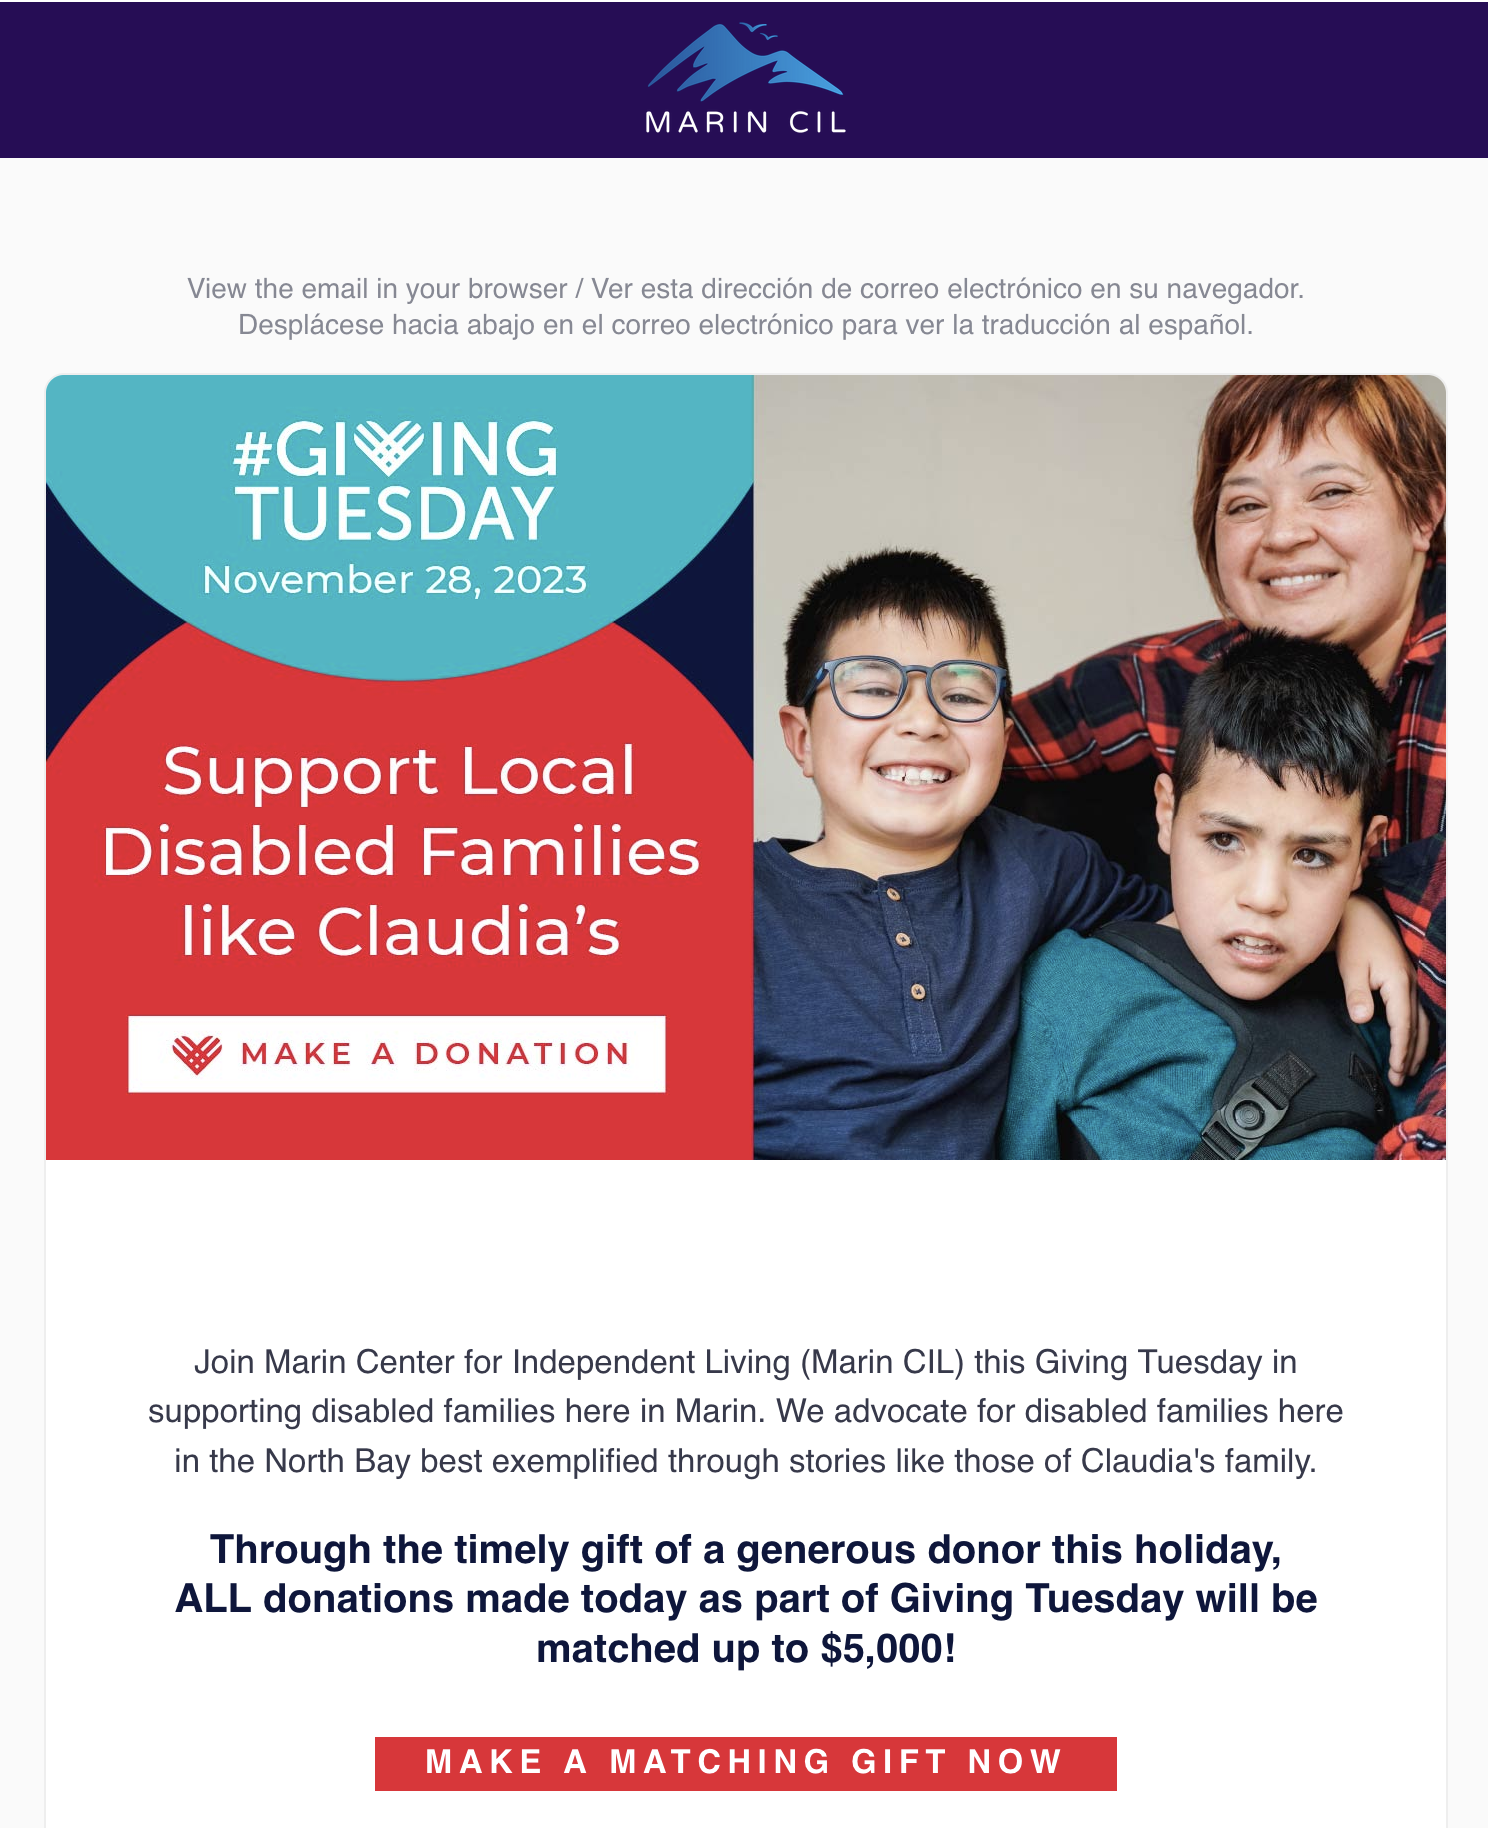 
Join Marin Center for Independent Living (Marin CIL) this Giving Tuesday in supporting disabled families here in Marin